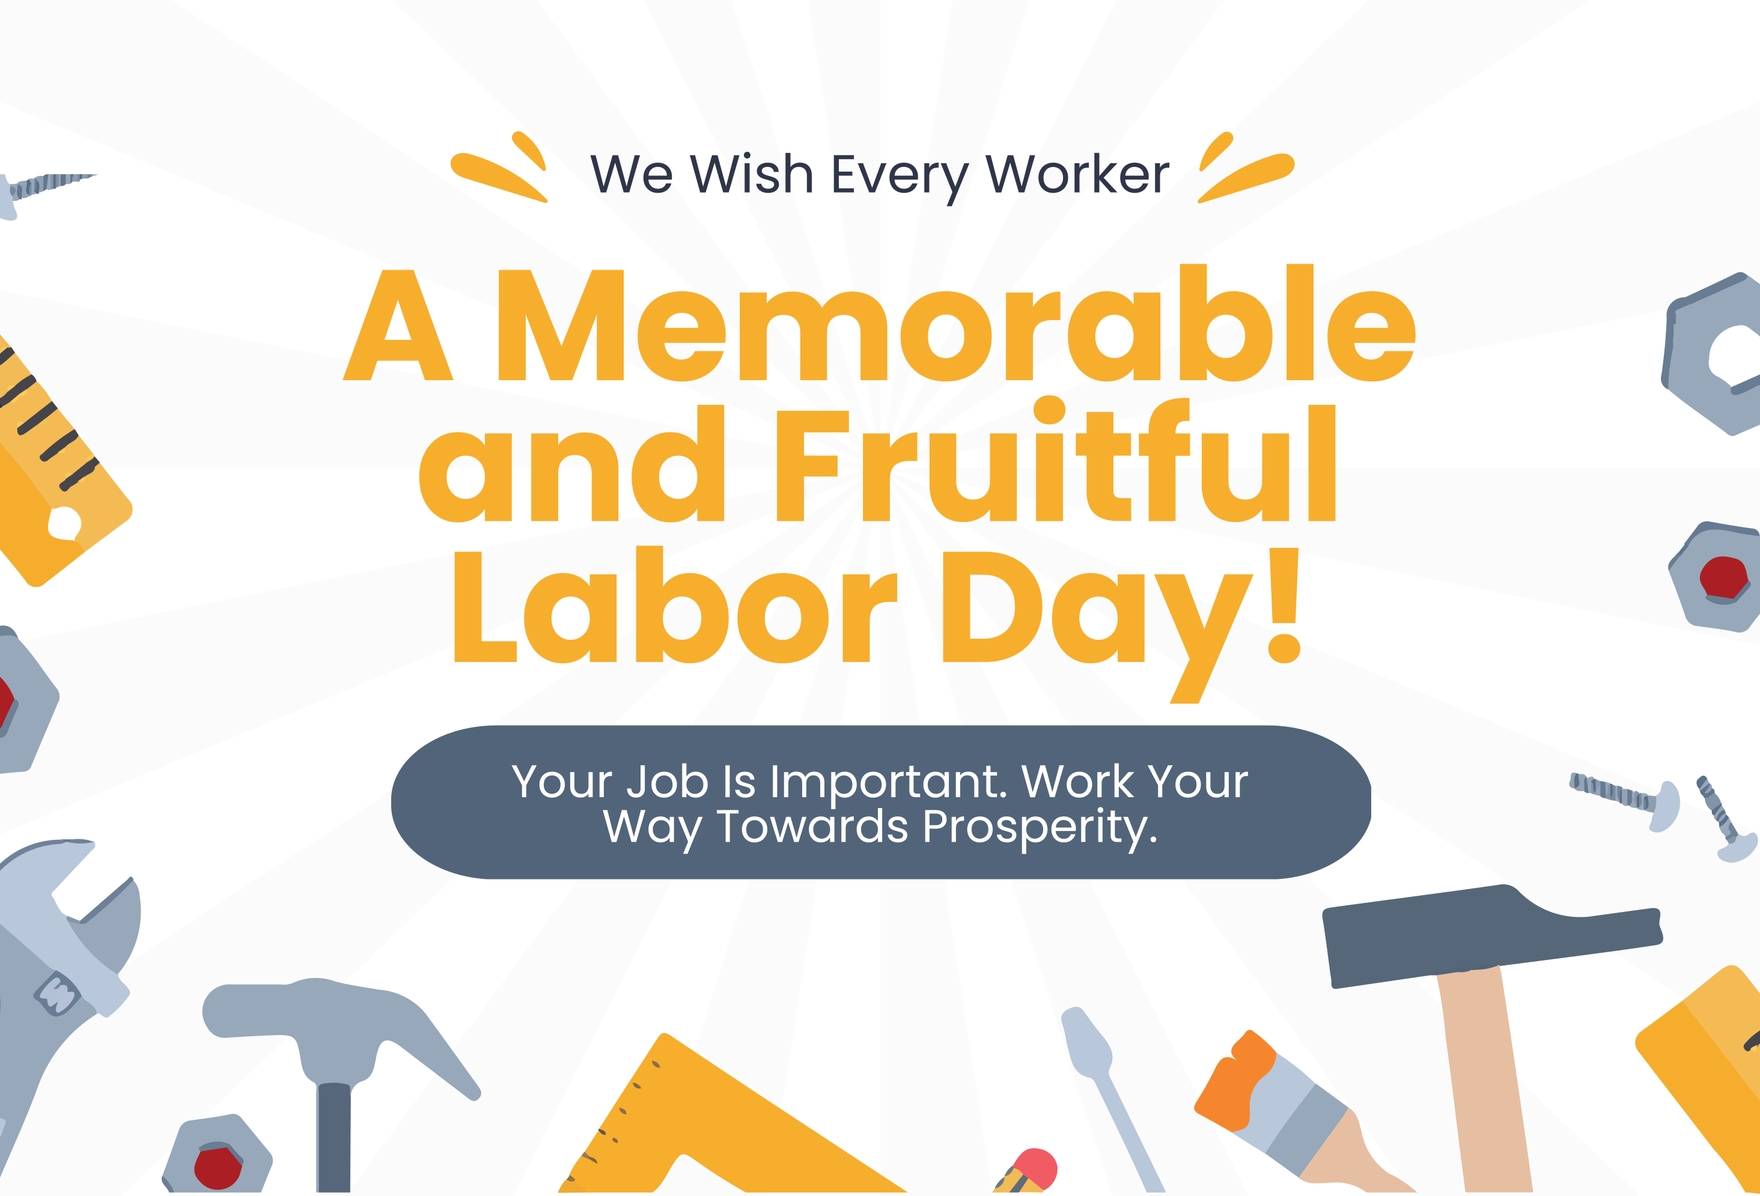 Free Labor Day Wishes Greeting Card in Word, Illustrator, PSD